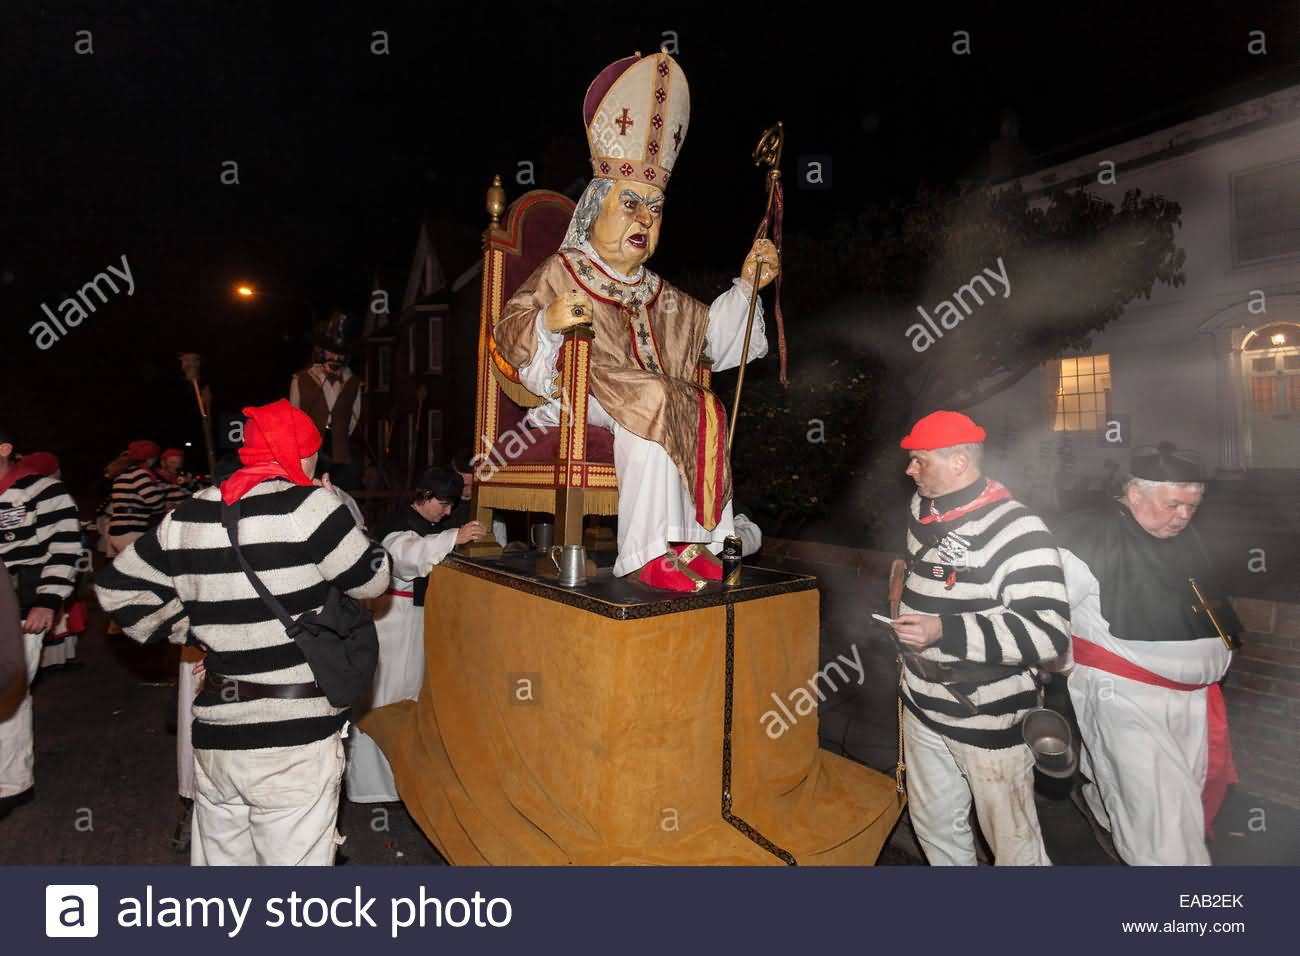 An Effigy Of The Pope Is Paraded Through The Streets Of Lewes During The Annual Guy Fawkes Parade